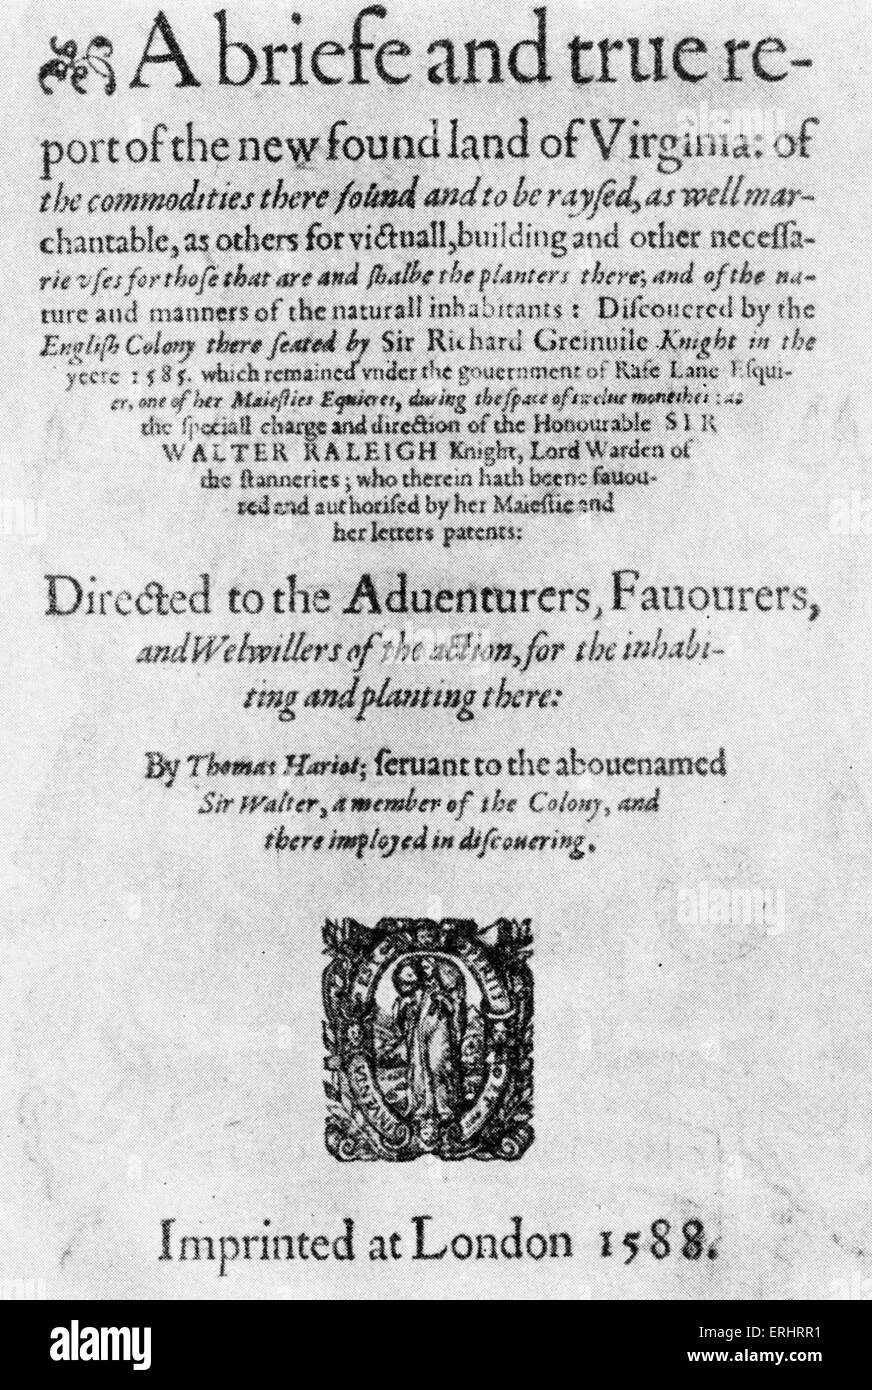 Virginia - 'A briefe and true report of the new found land of Virginia' by Thomas Harriot. Titlepage. Published in London, 1588. TH: English astronomer, mathematician, ethnographer, and translator, c 1560 – 2 July 1621. Stock Photo